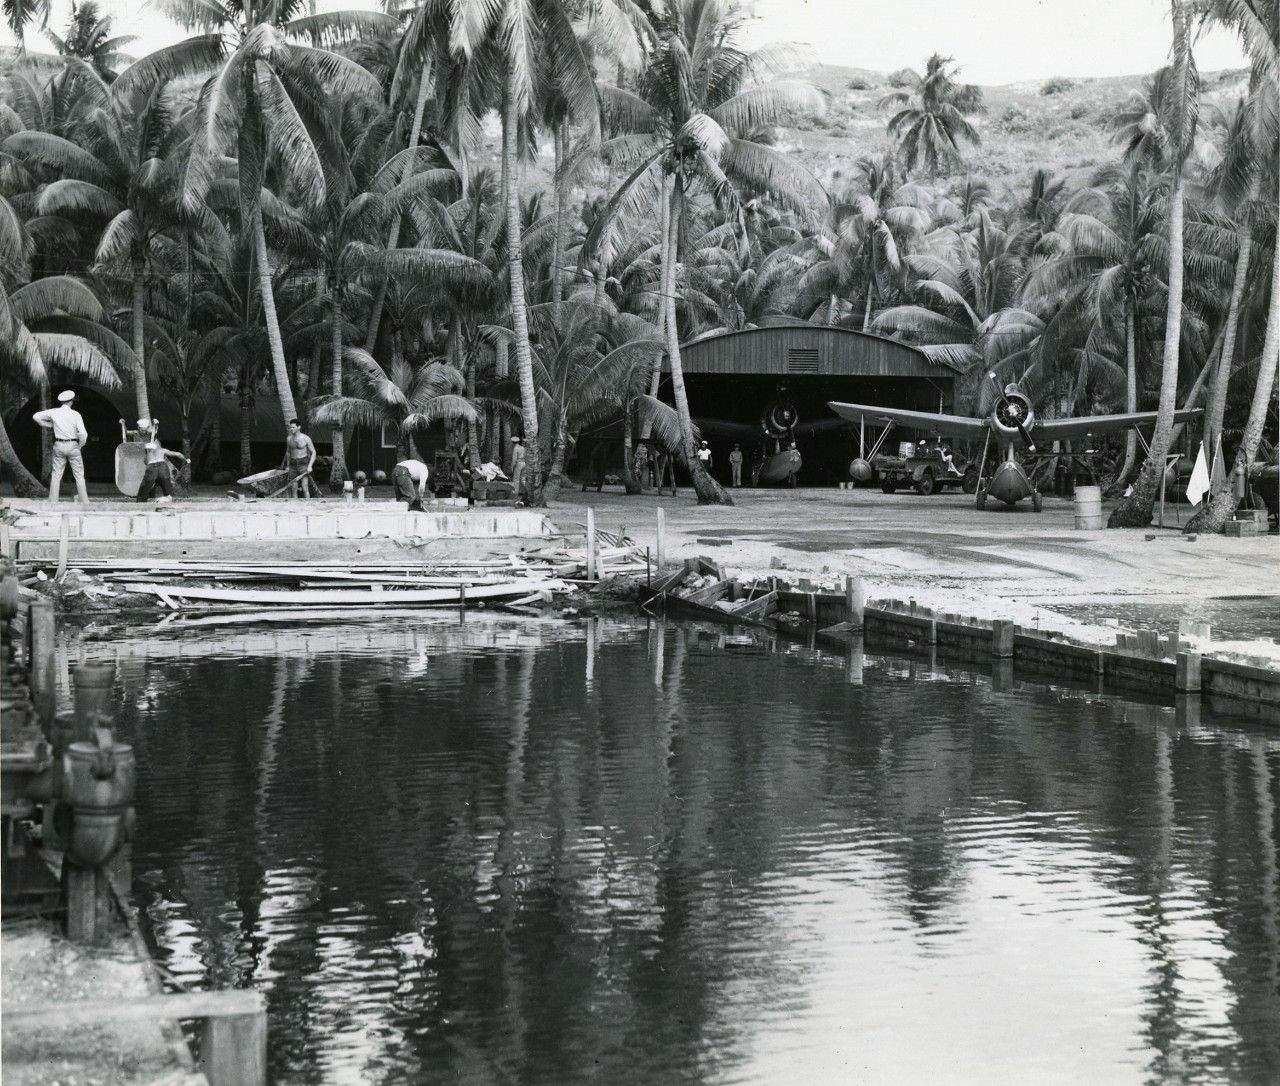 Walsworth image of pacific base development, WWII